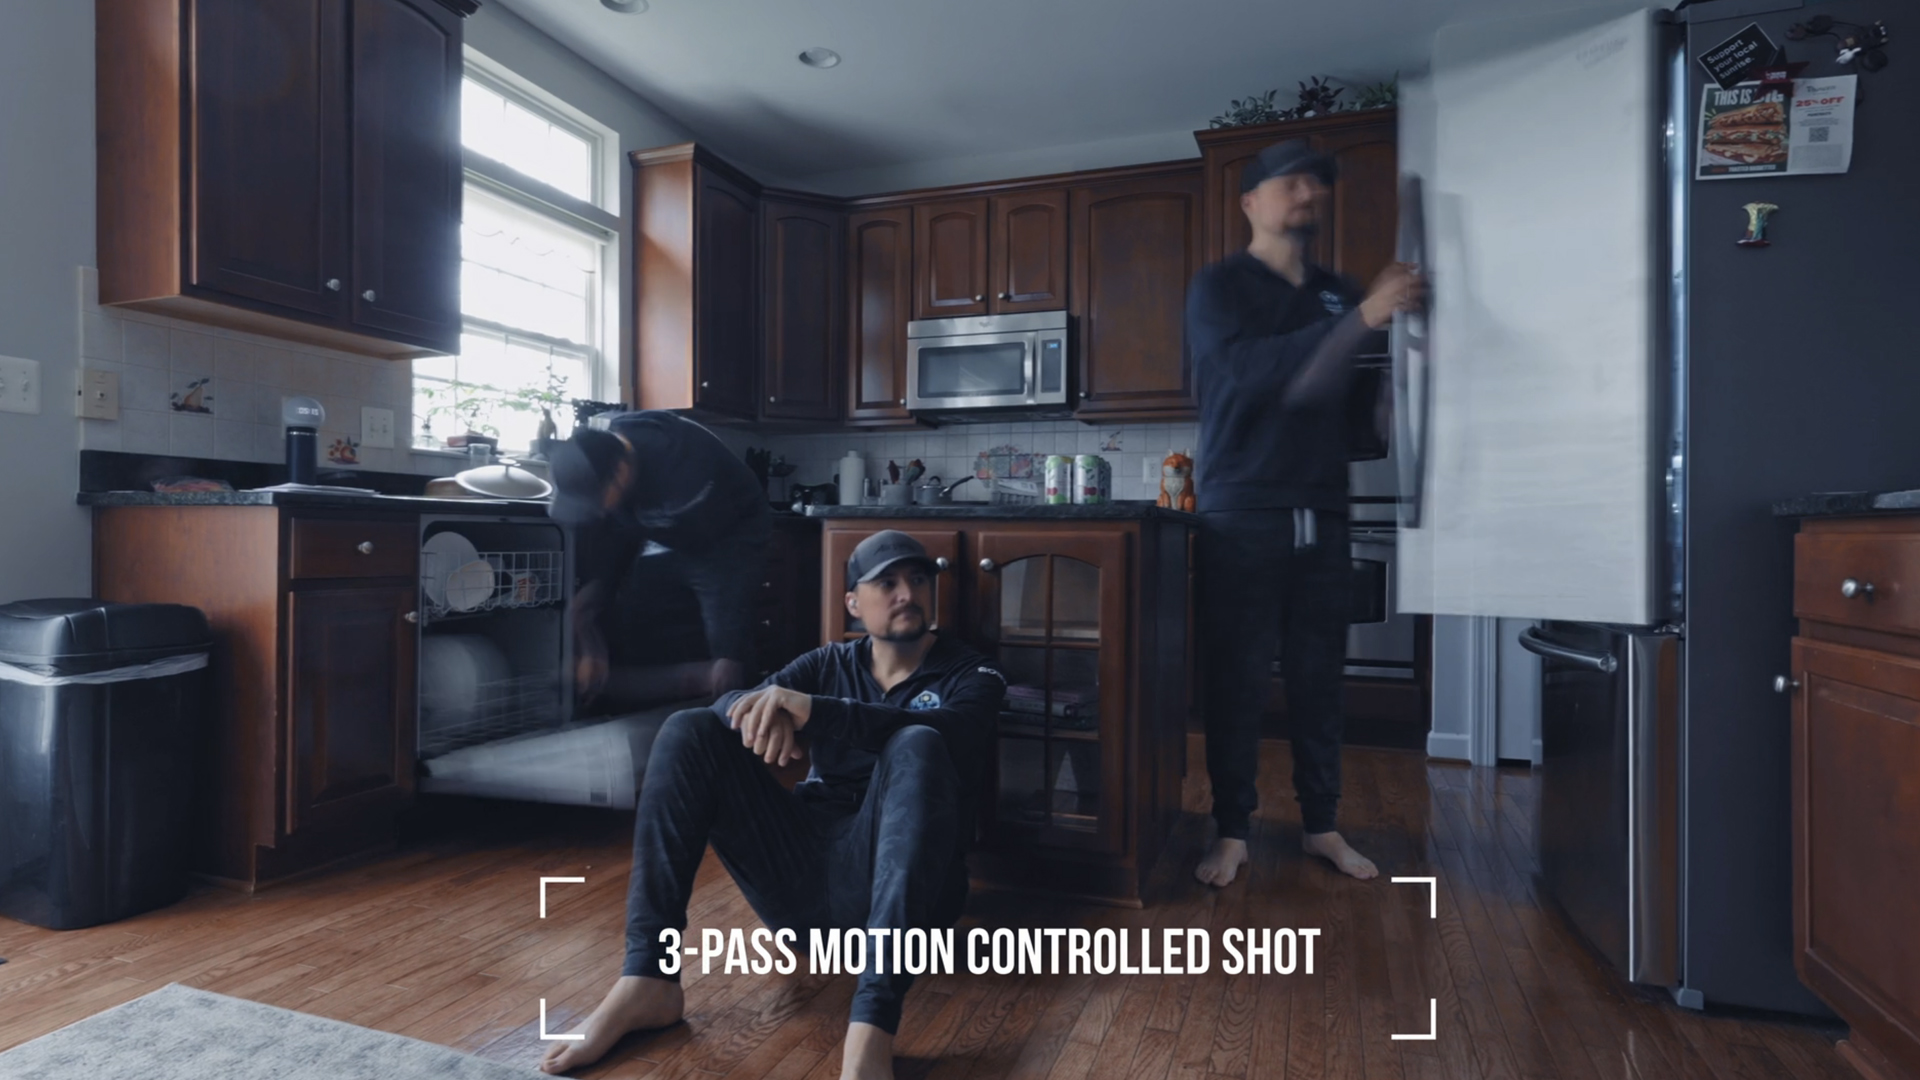 mastering motion control timelapse - 3-pass motion controlled shot